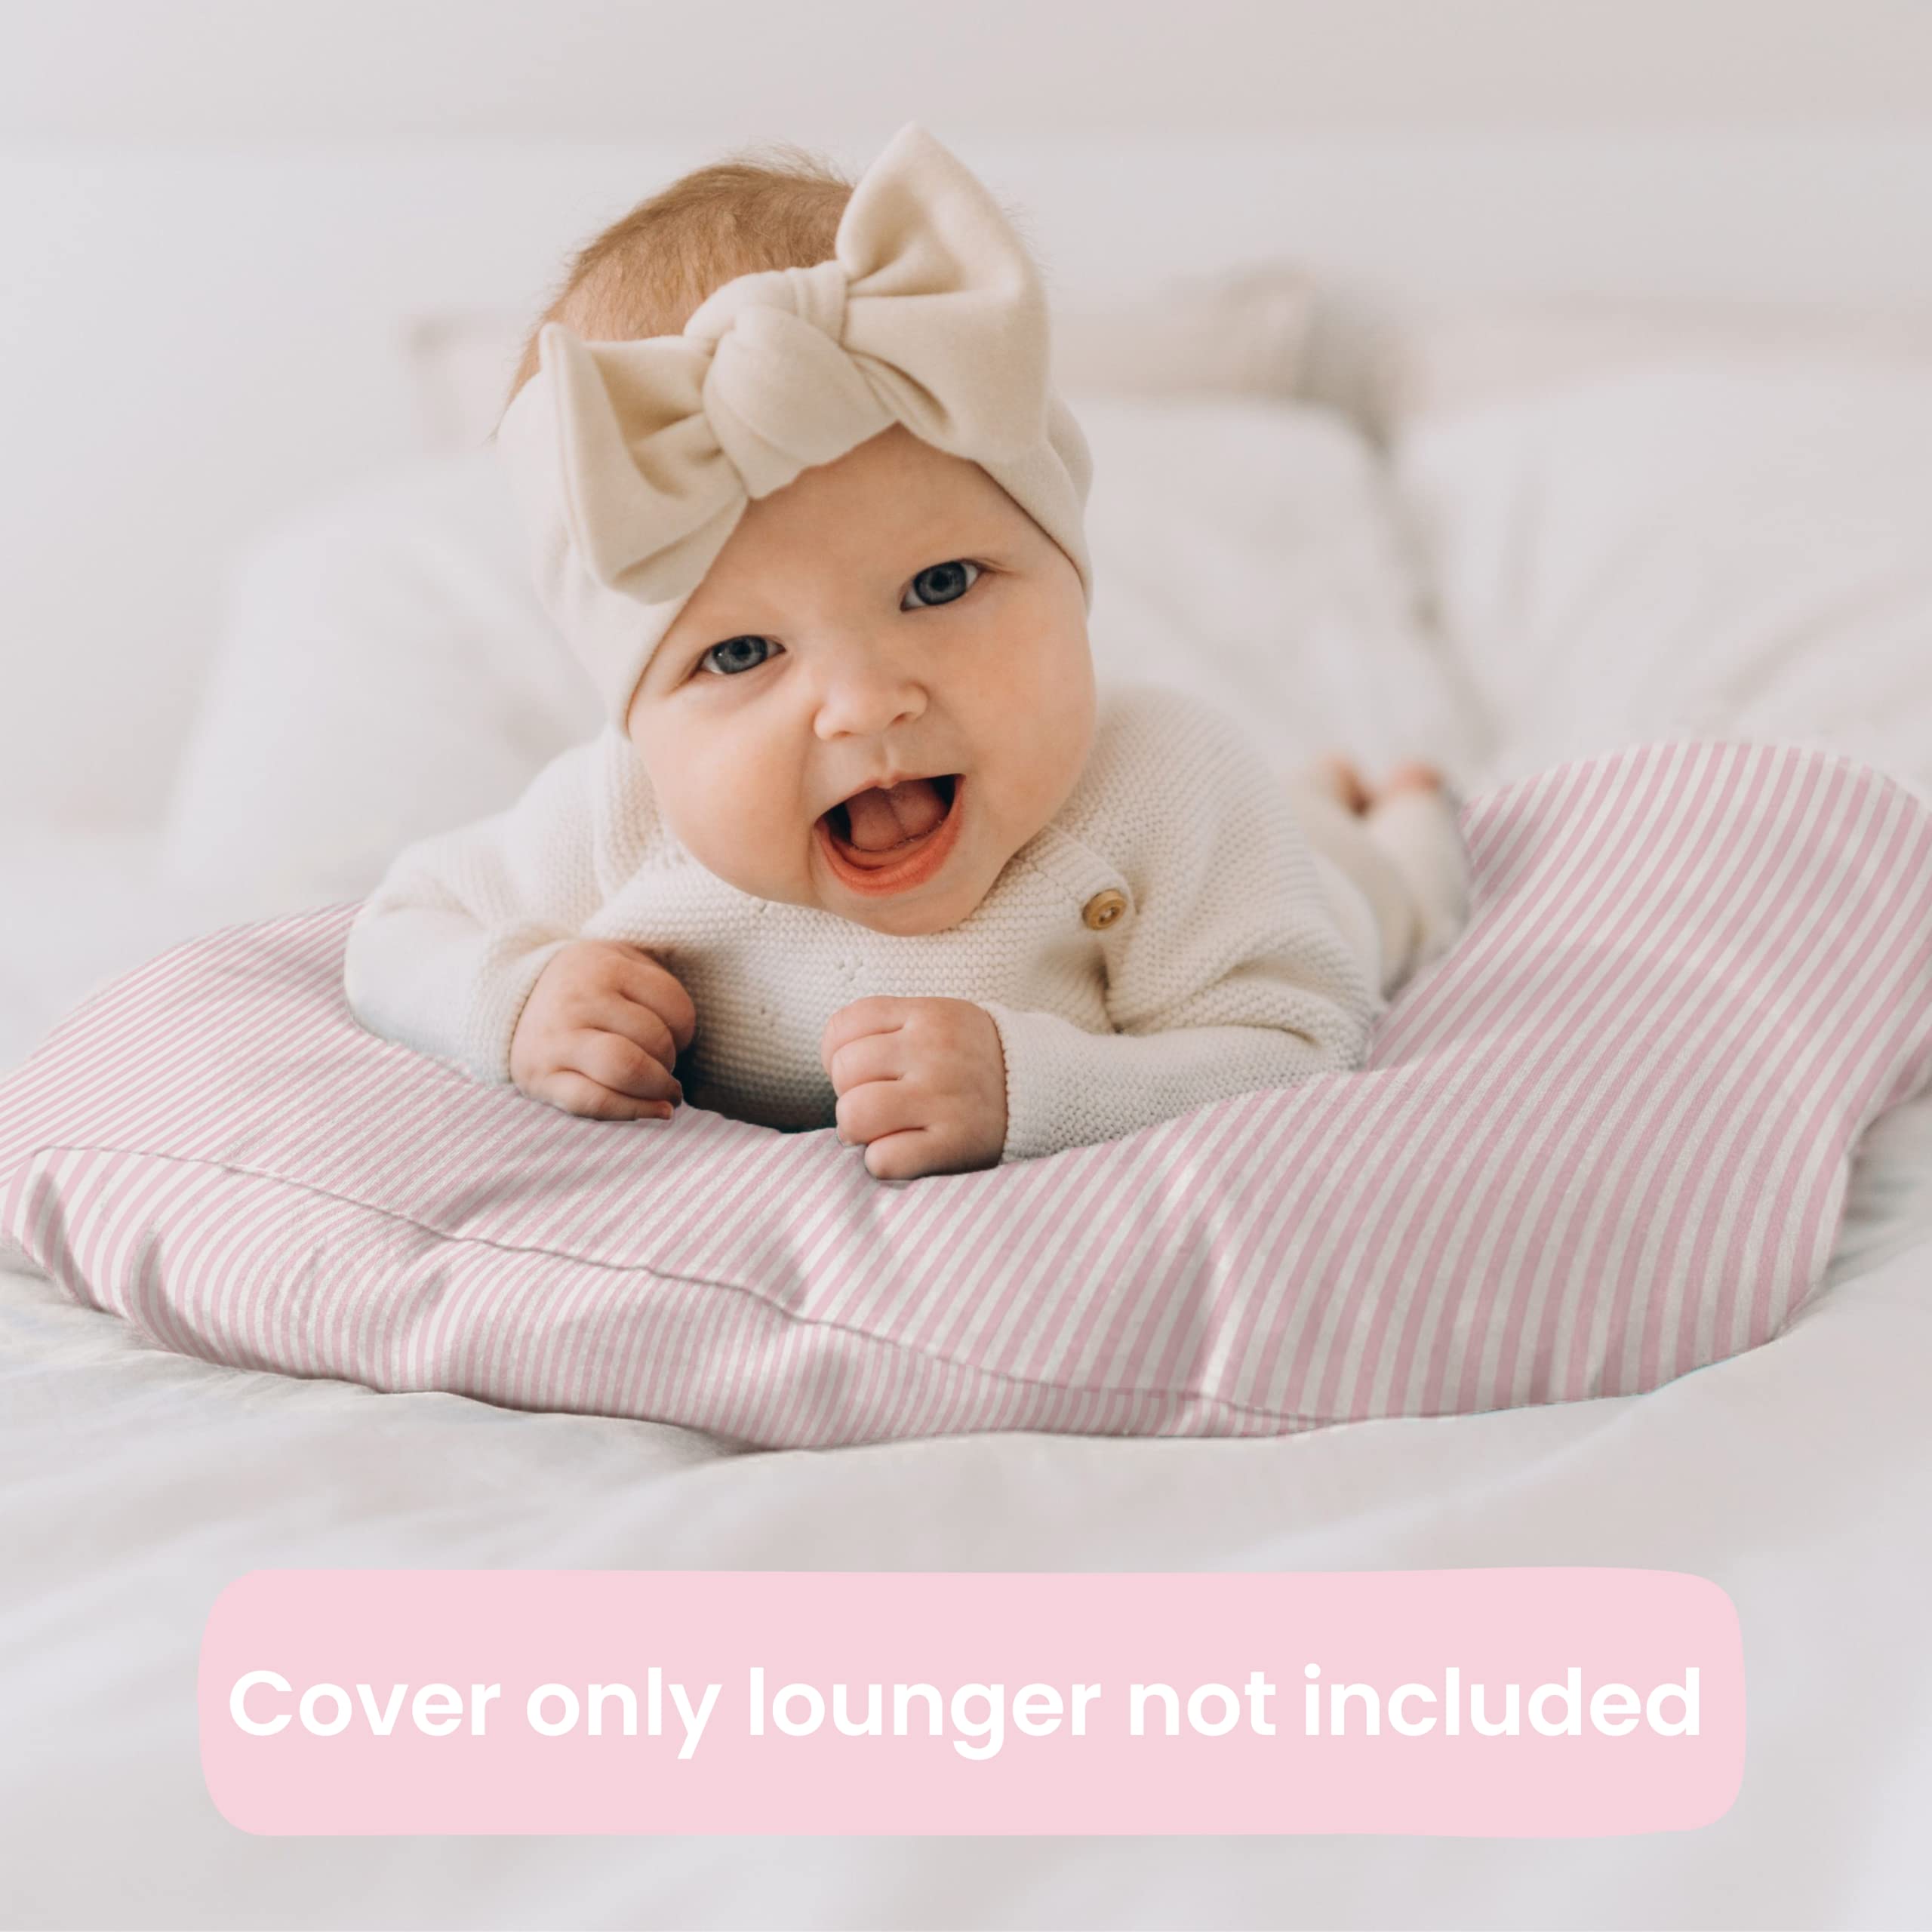 Max&So Baby Lounger Cover for Newborn - Infant Lounger Pillow Cover with Removable, Snug-Fitting Design - Ultra-Soft Cotton Cover for Newborn Lounger Pillow - Pink and Stripe Pink - Cover Only